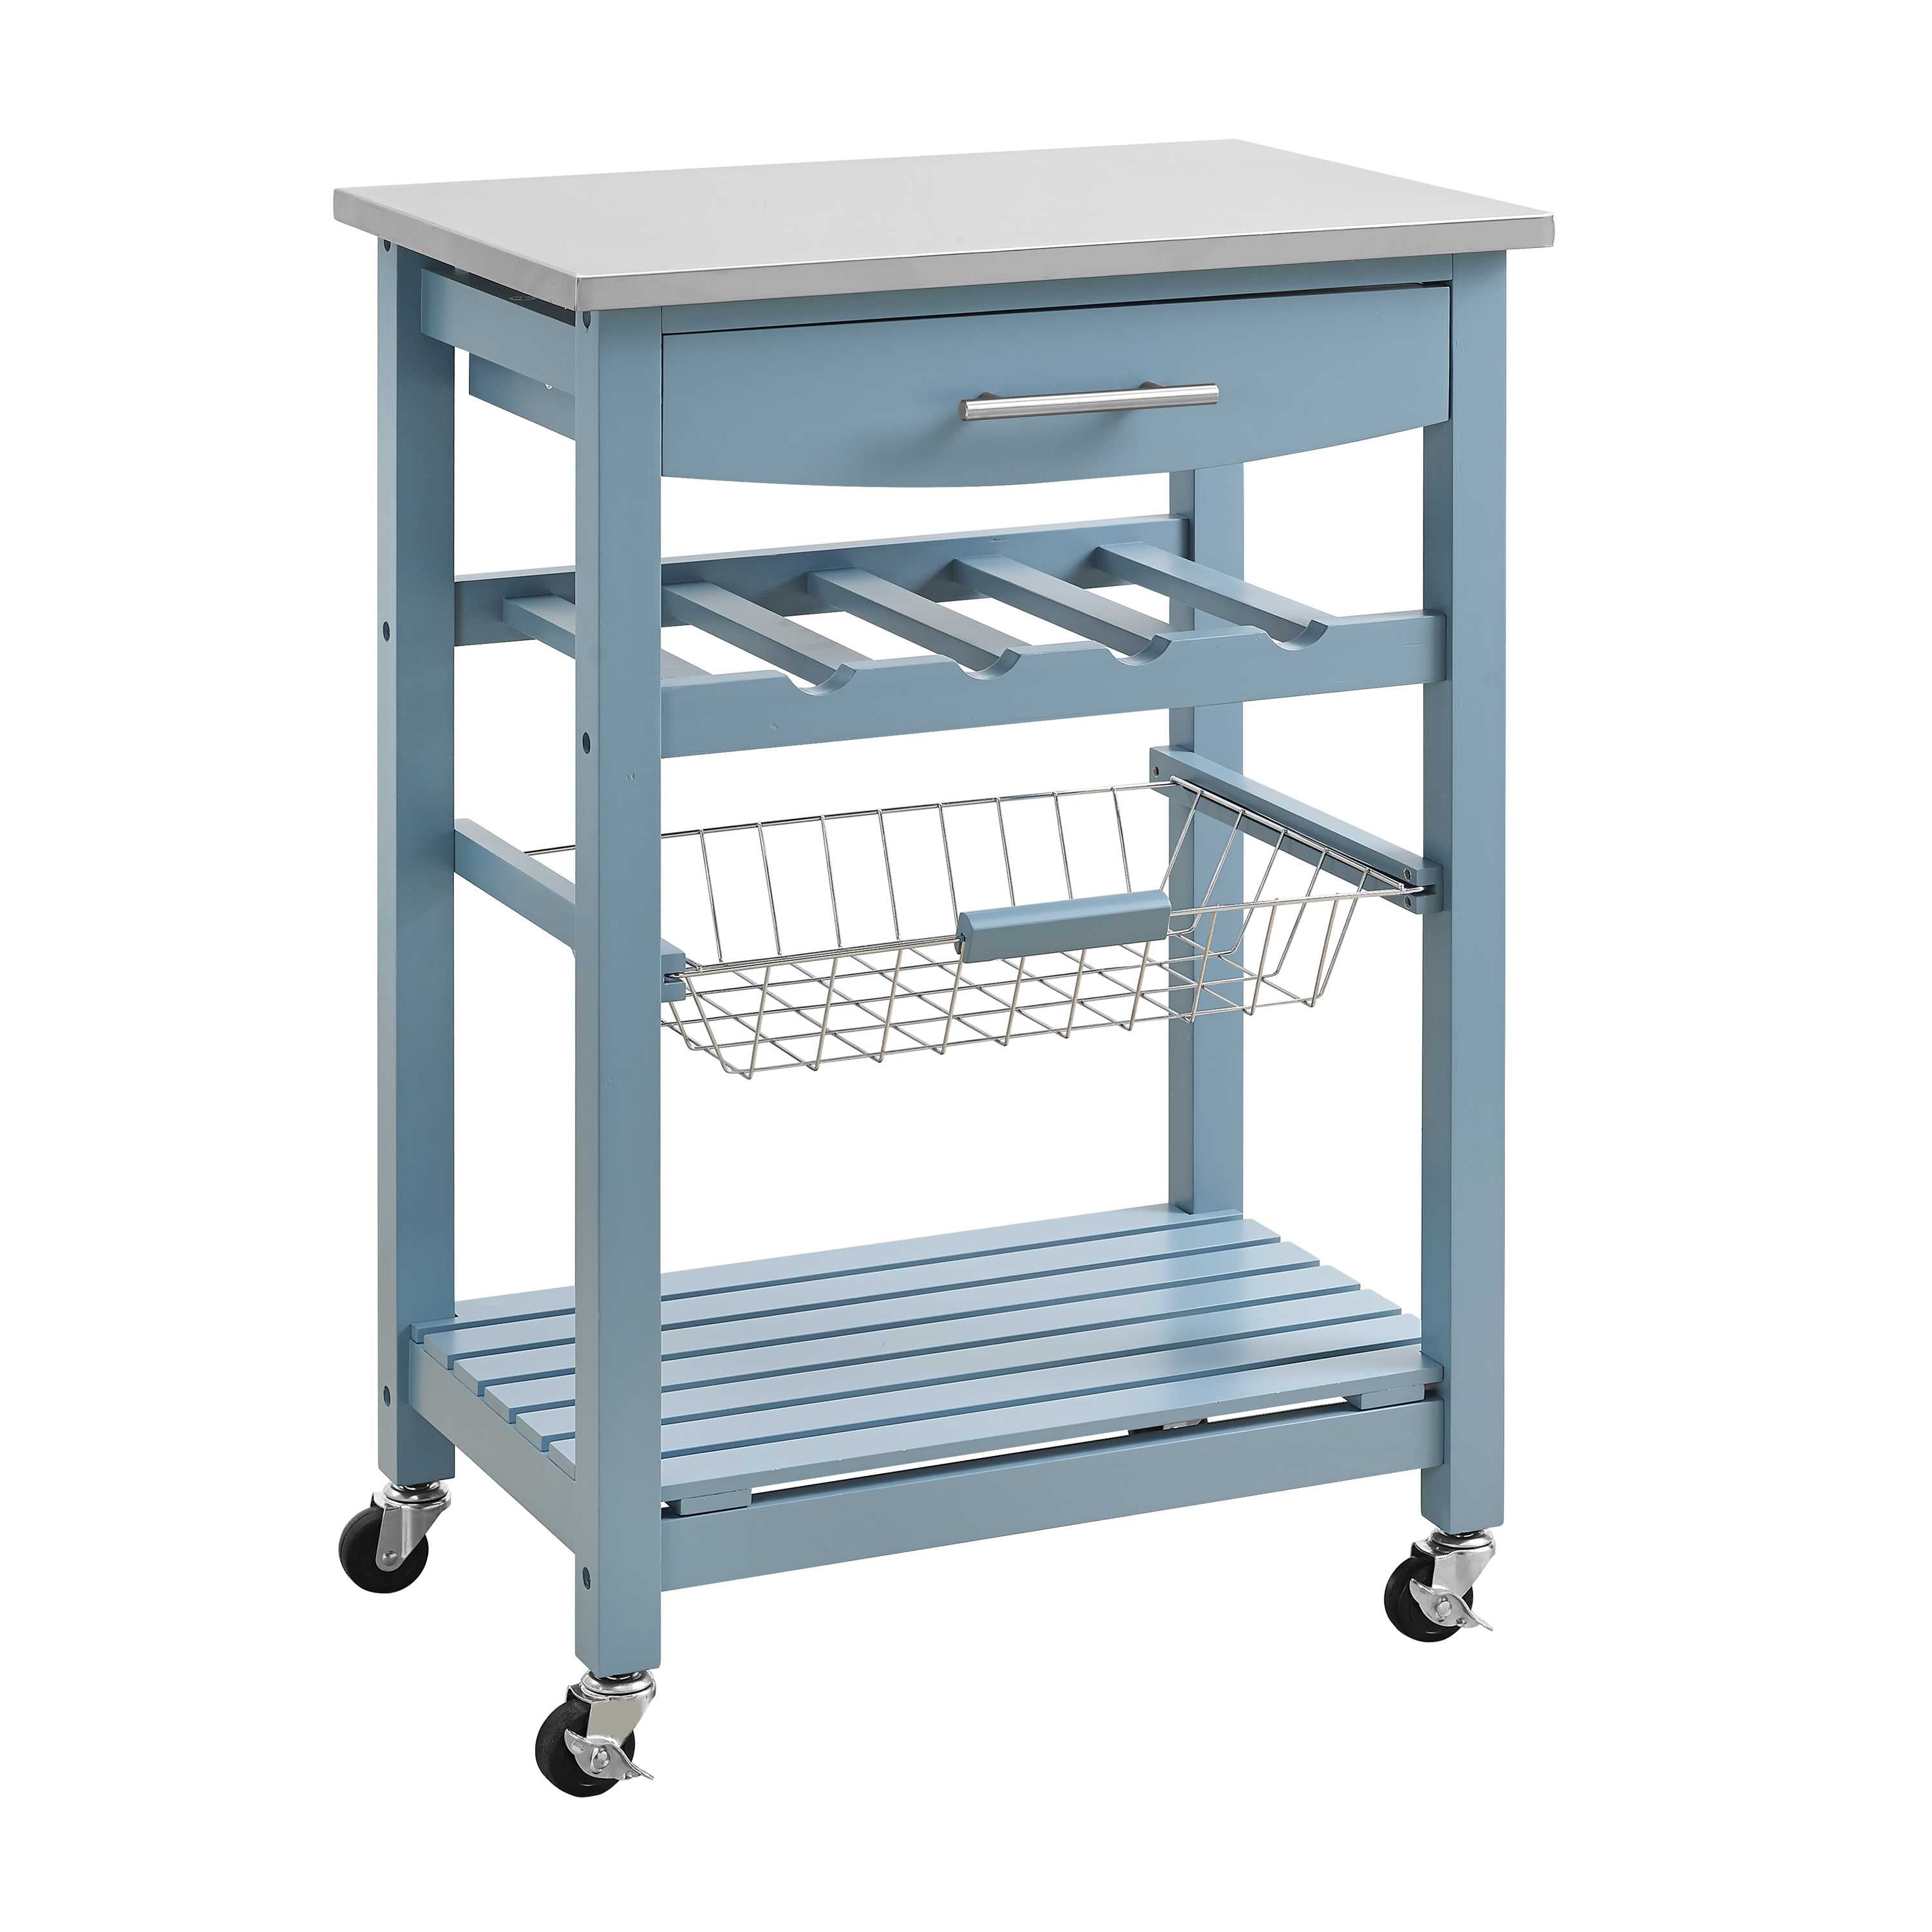 Contemporary Kitchen Island with Stainless Steel Top and Casters, Blue